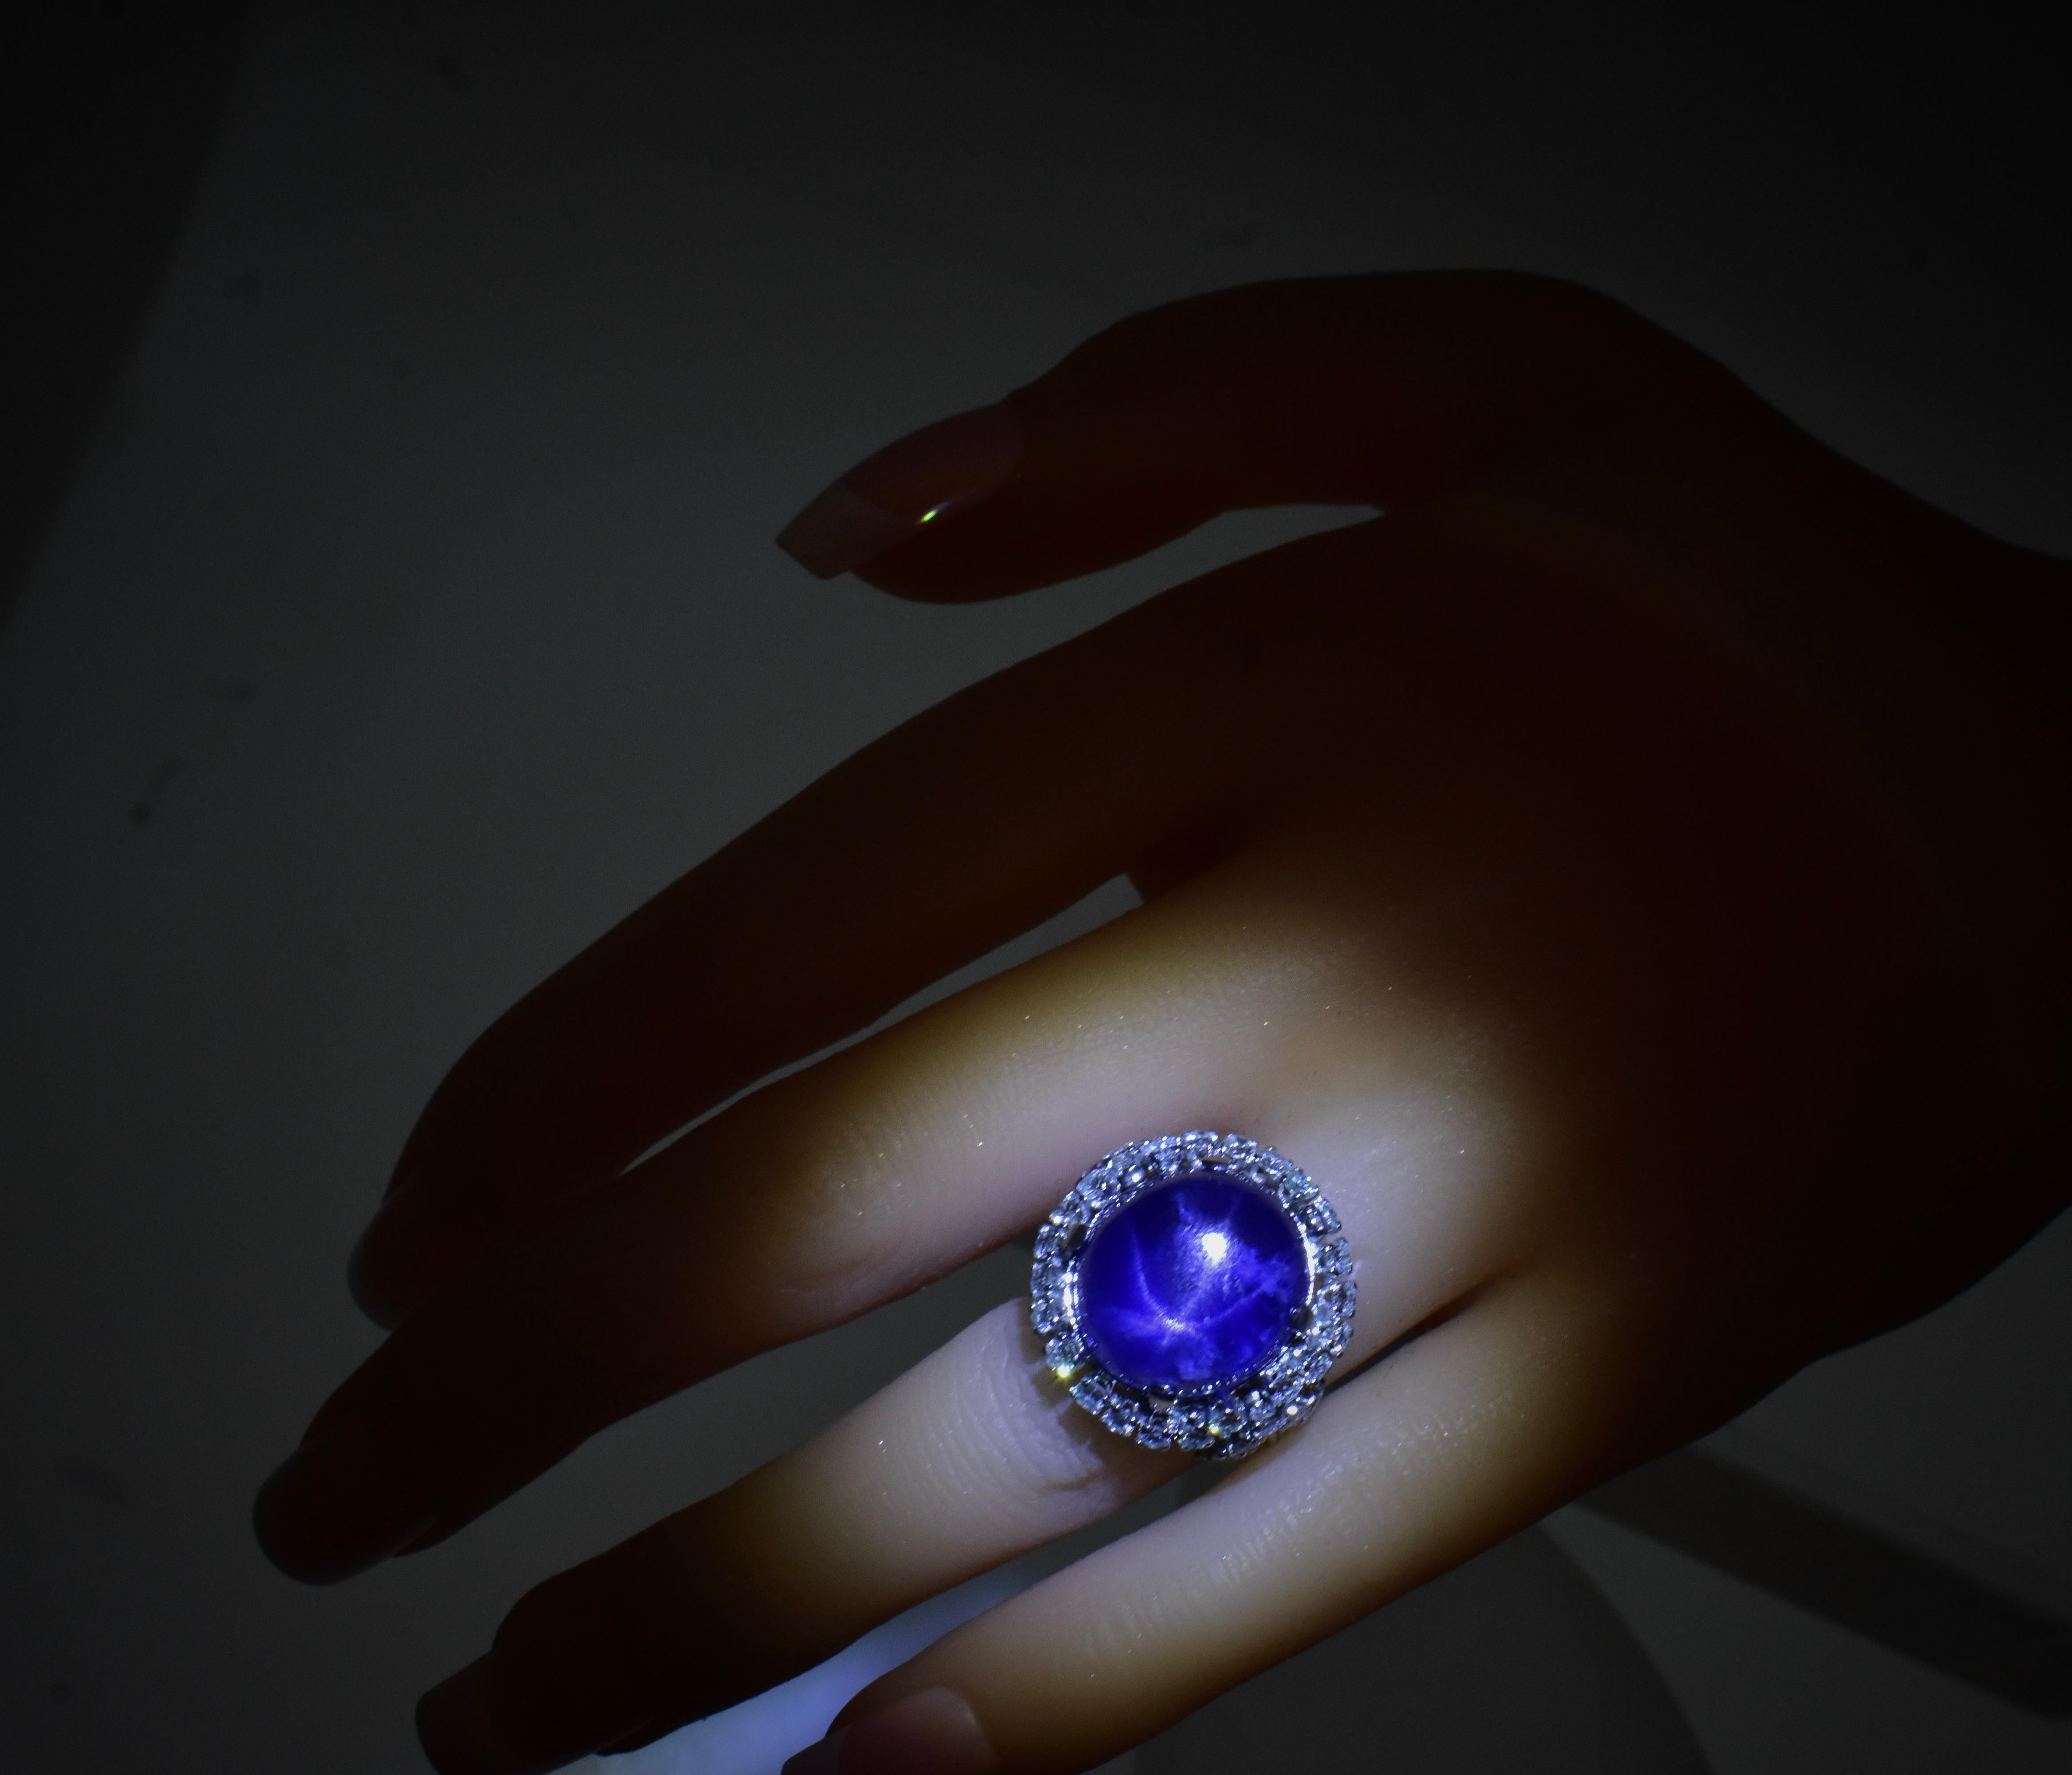 Cabochon Blue Star Sapphire, unheated, weighing 15 cts and Diamond Ring, Circa 1950. For Sale